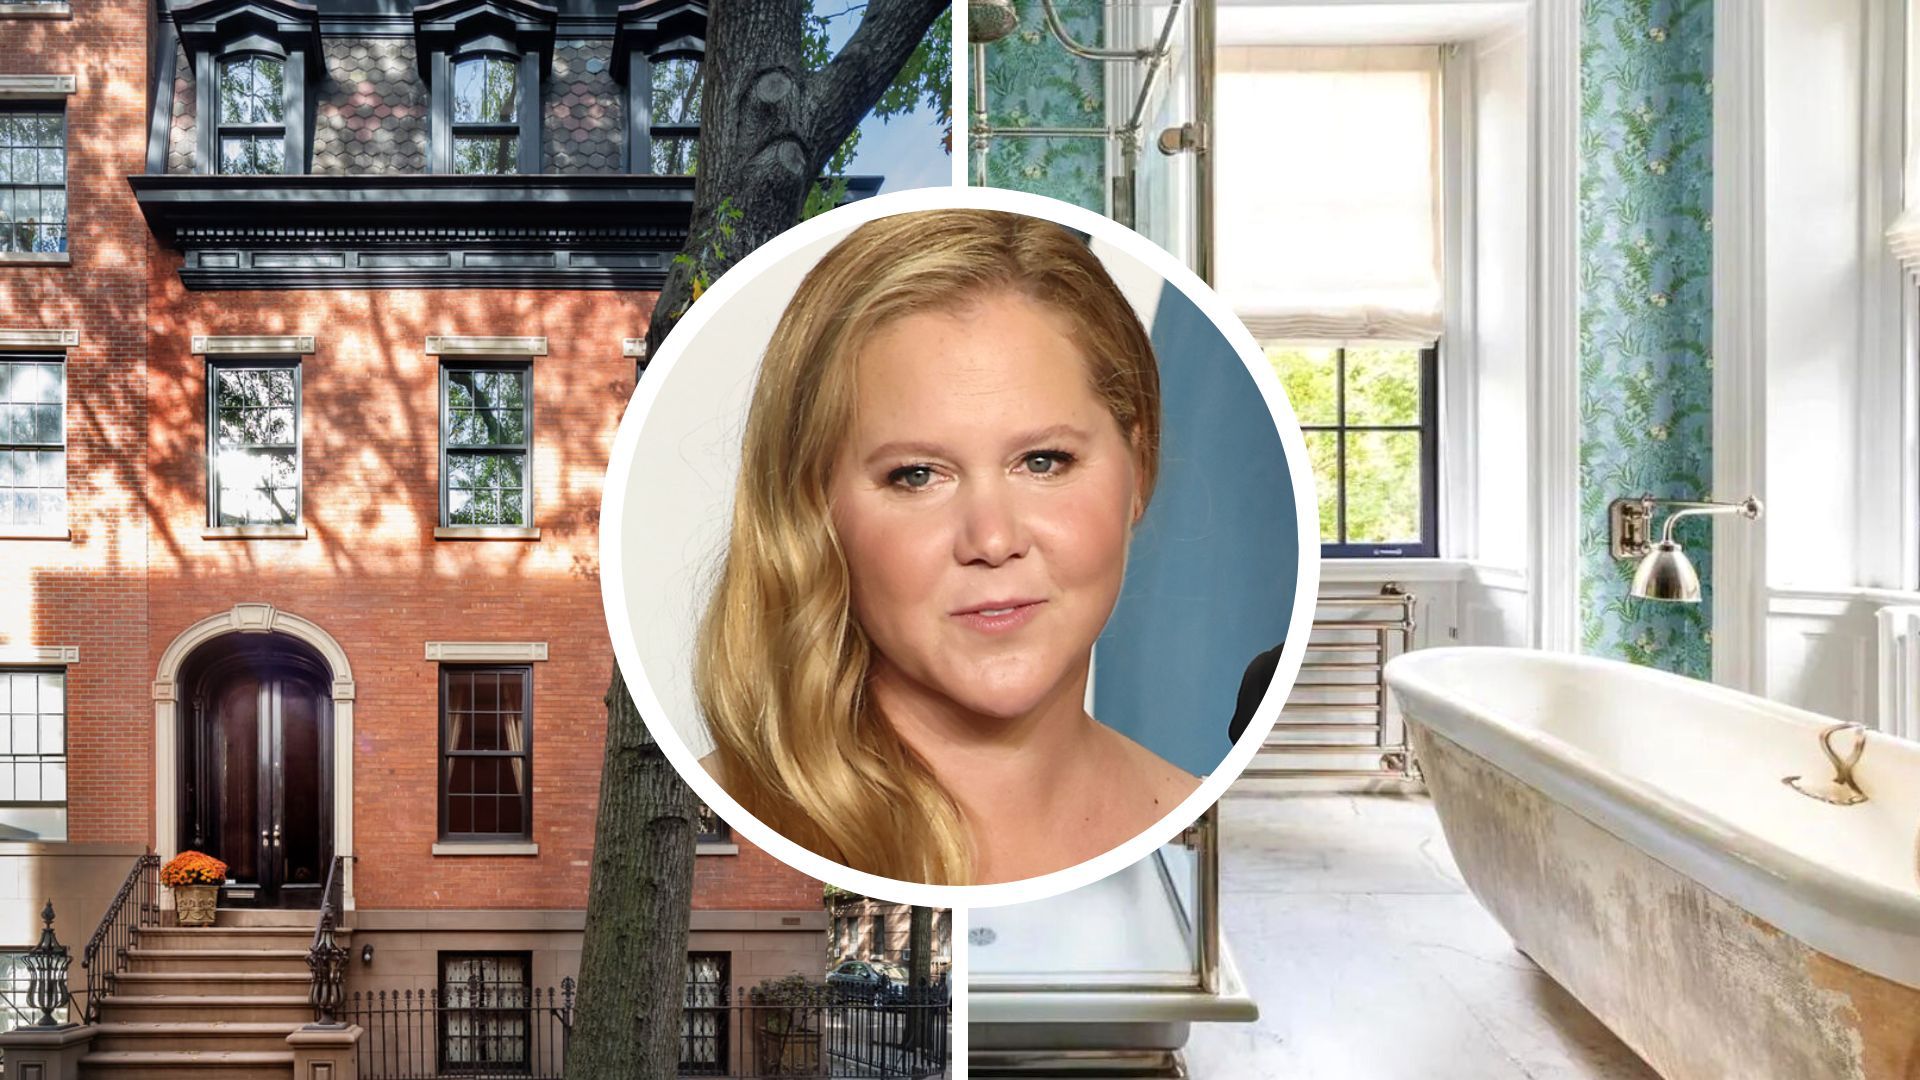 Amy Schumer buys iconic home from 'Moonstruck' for $2 million over asking